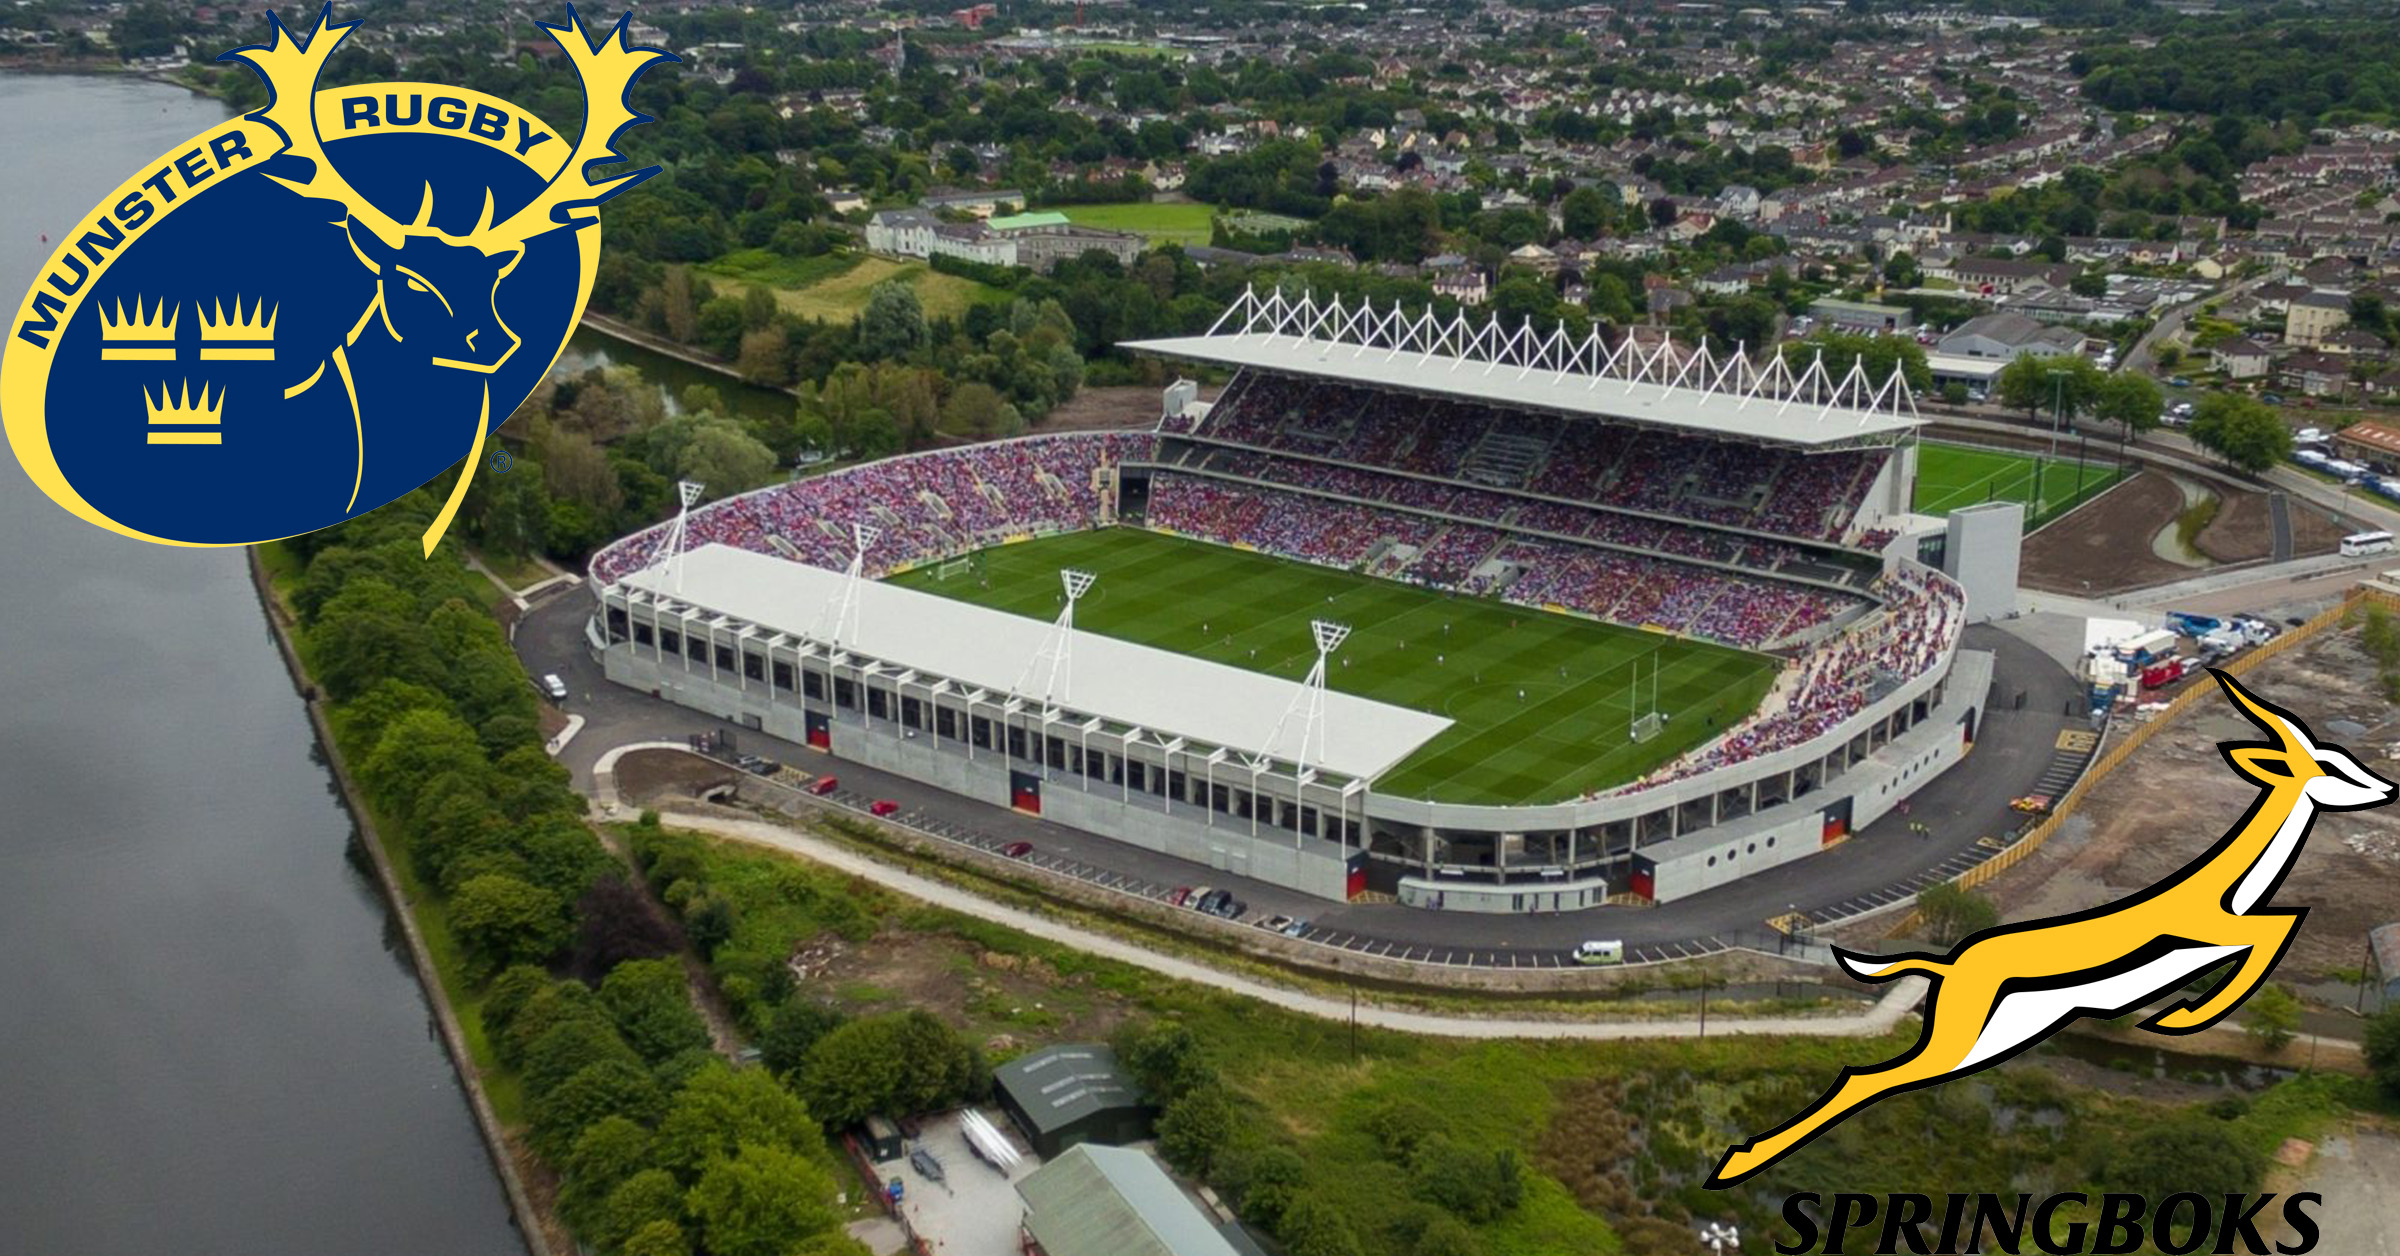 BREAKING Páirc Uí Chaoimh Set to Host a Major Rugby Match Between Munster vs South Africa